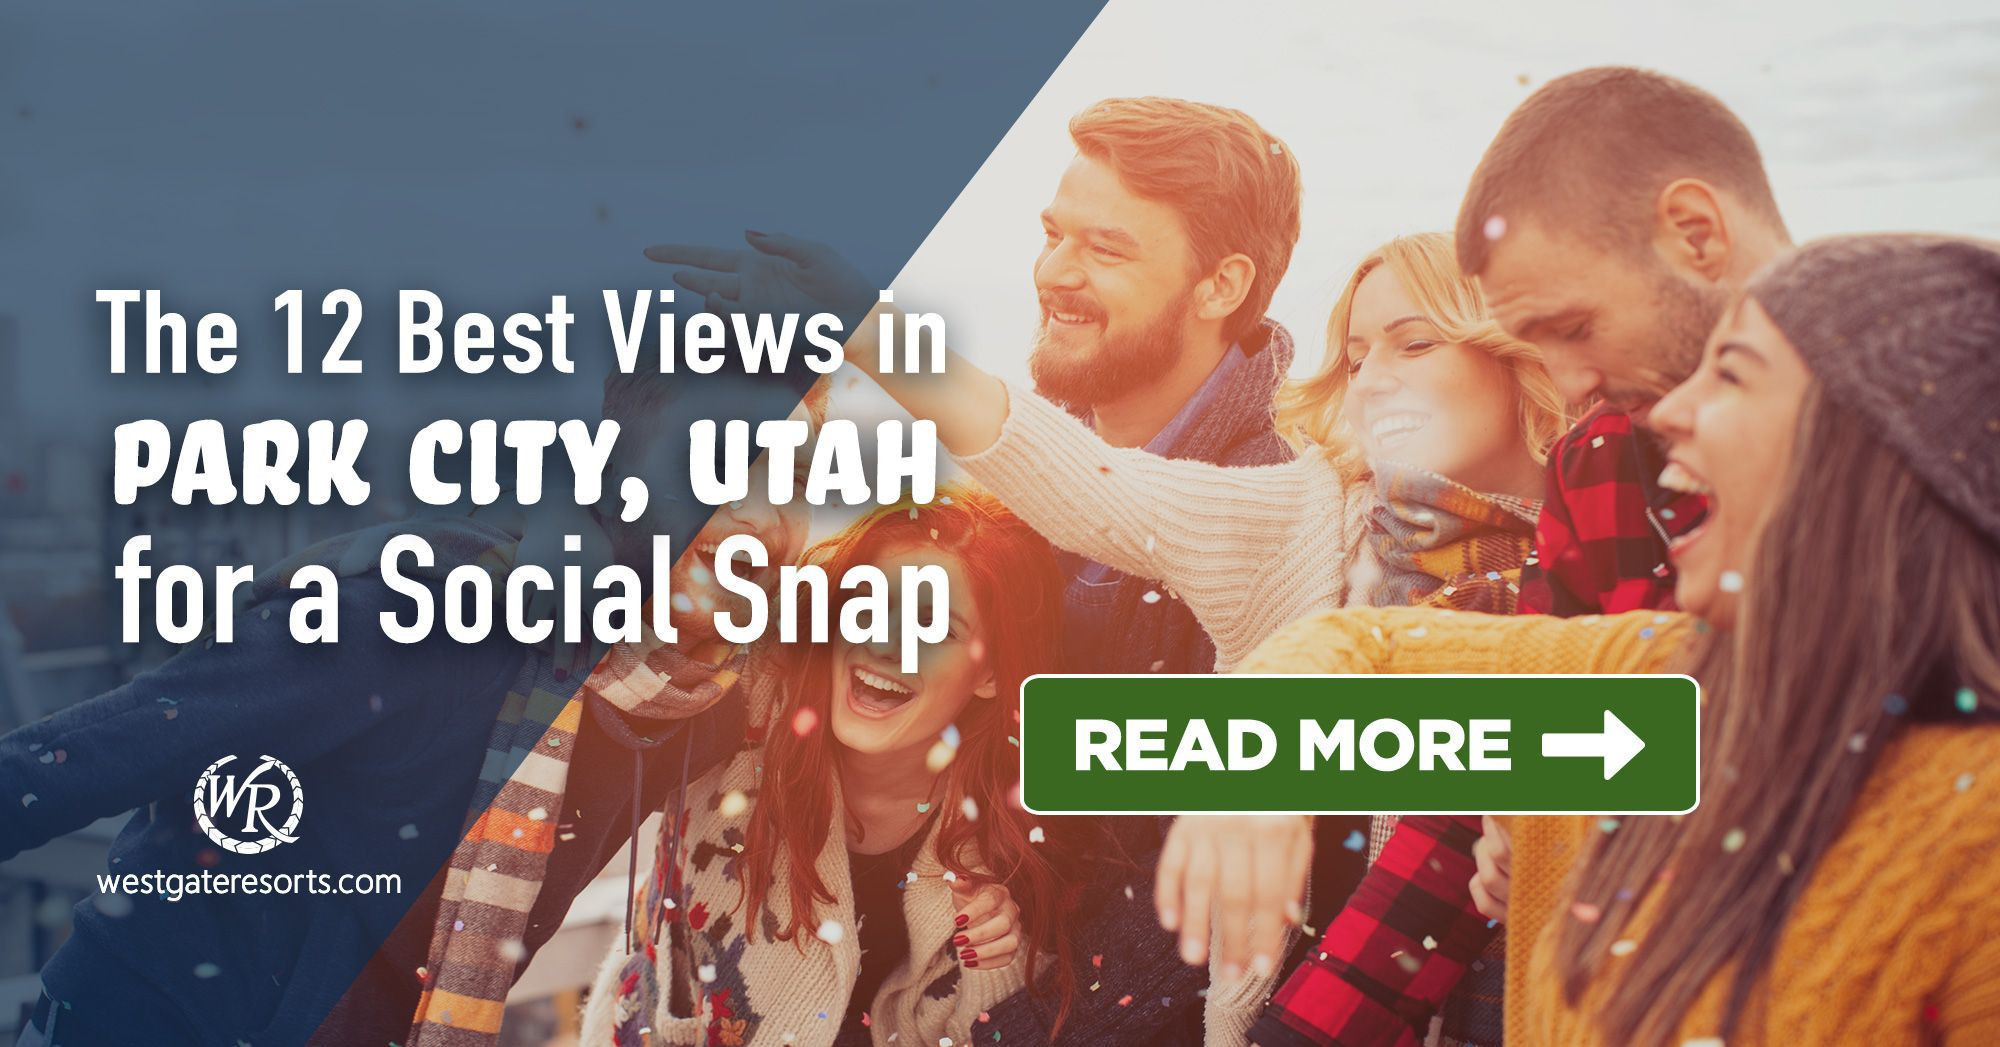  10 Things to do in Park City Utah in Winter Without Spending a Dime